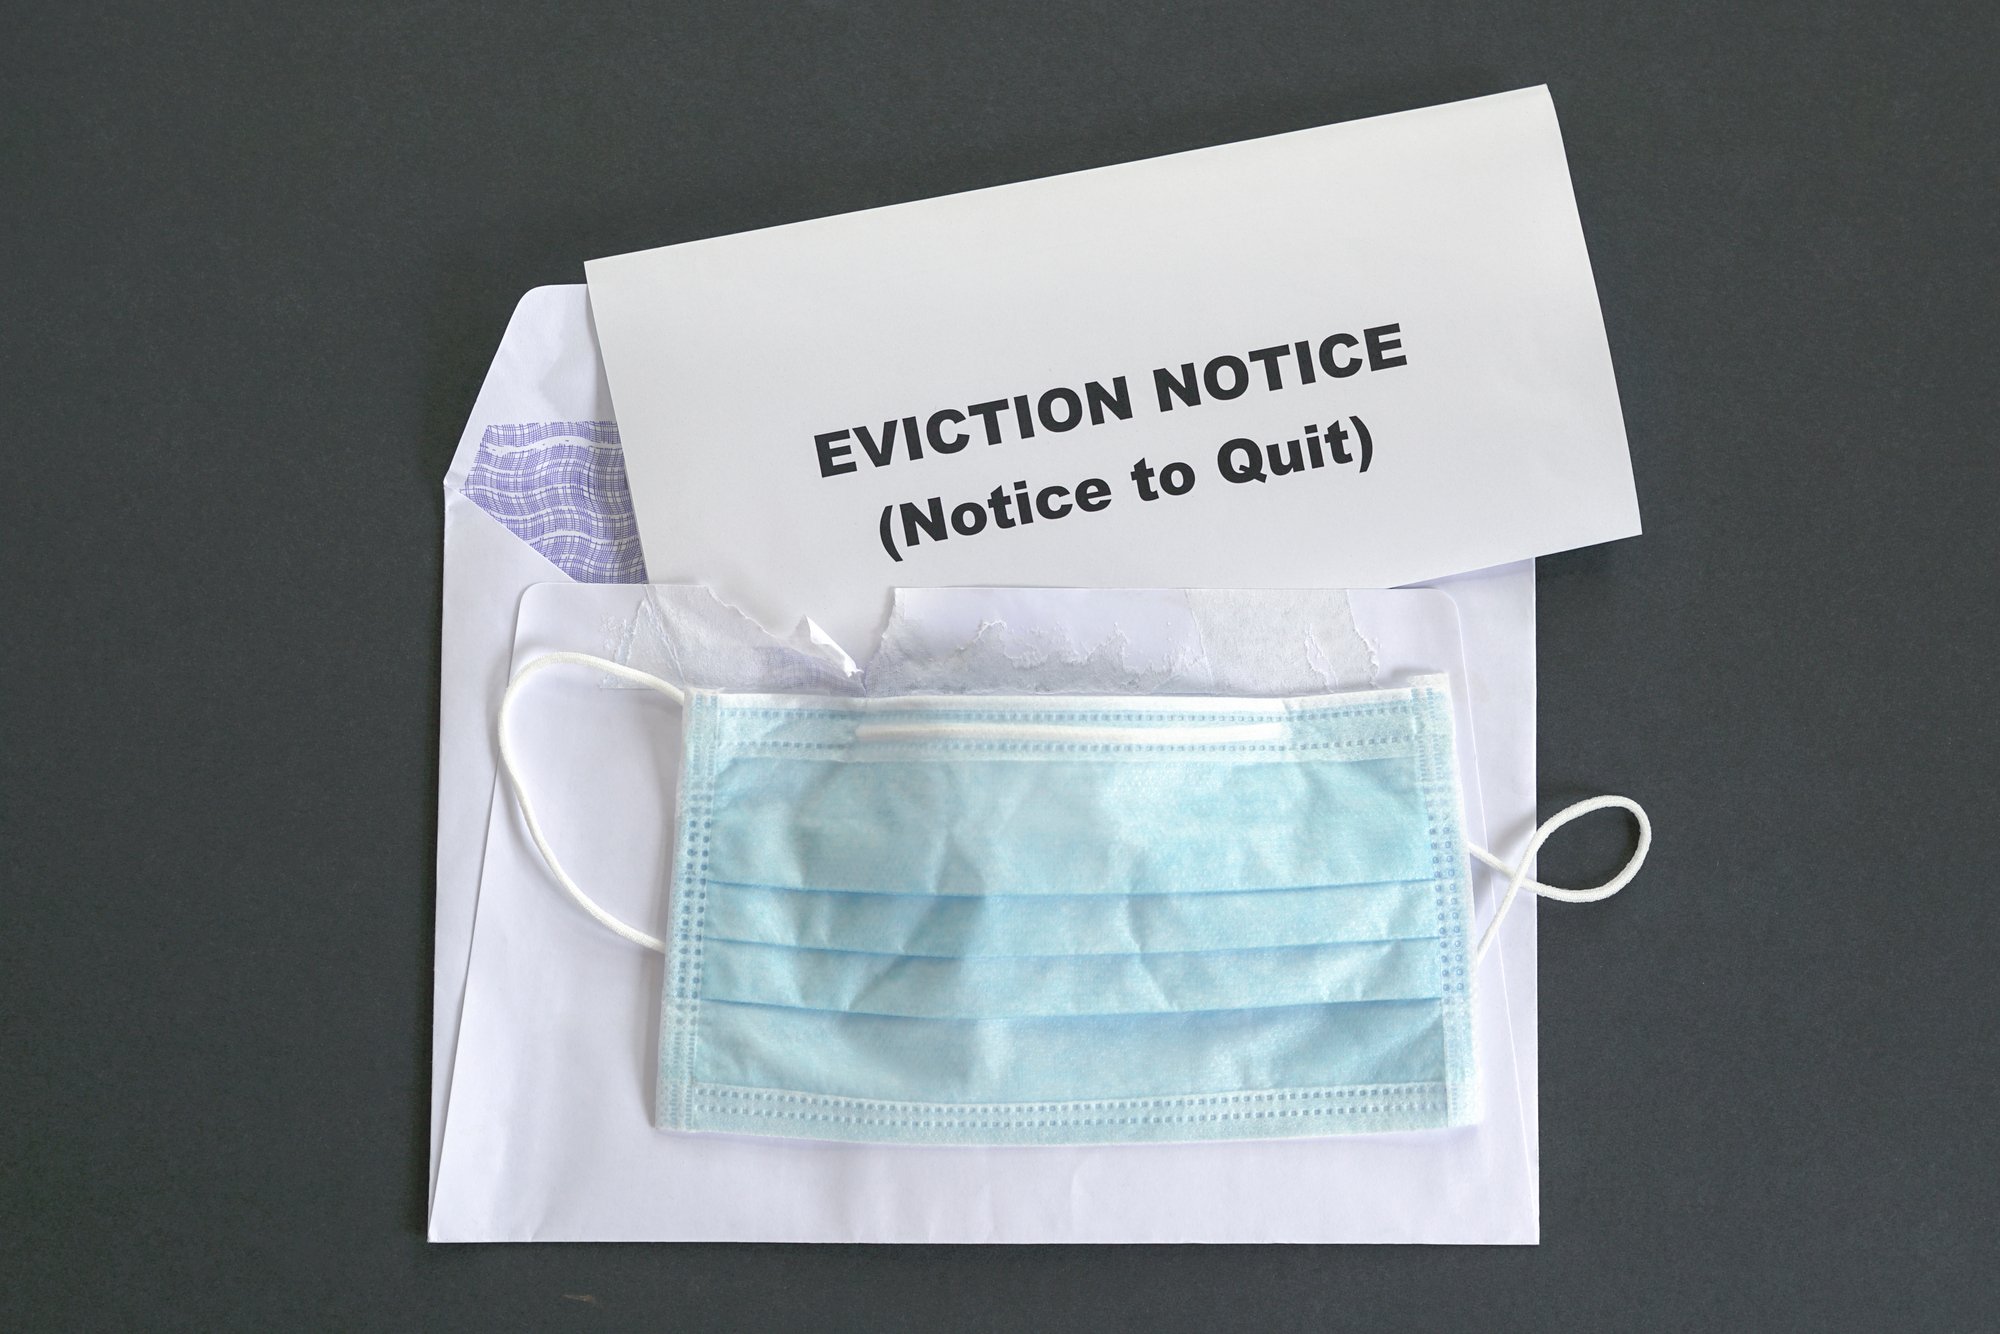 Eviction notice with face mask. Top view